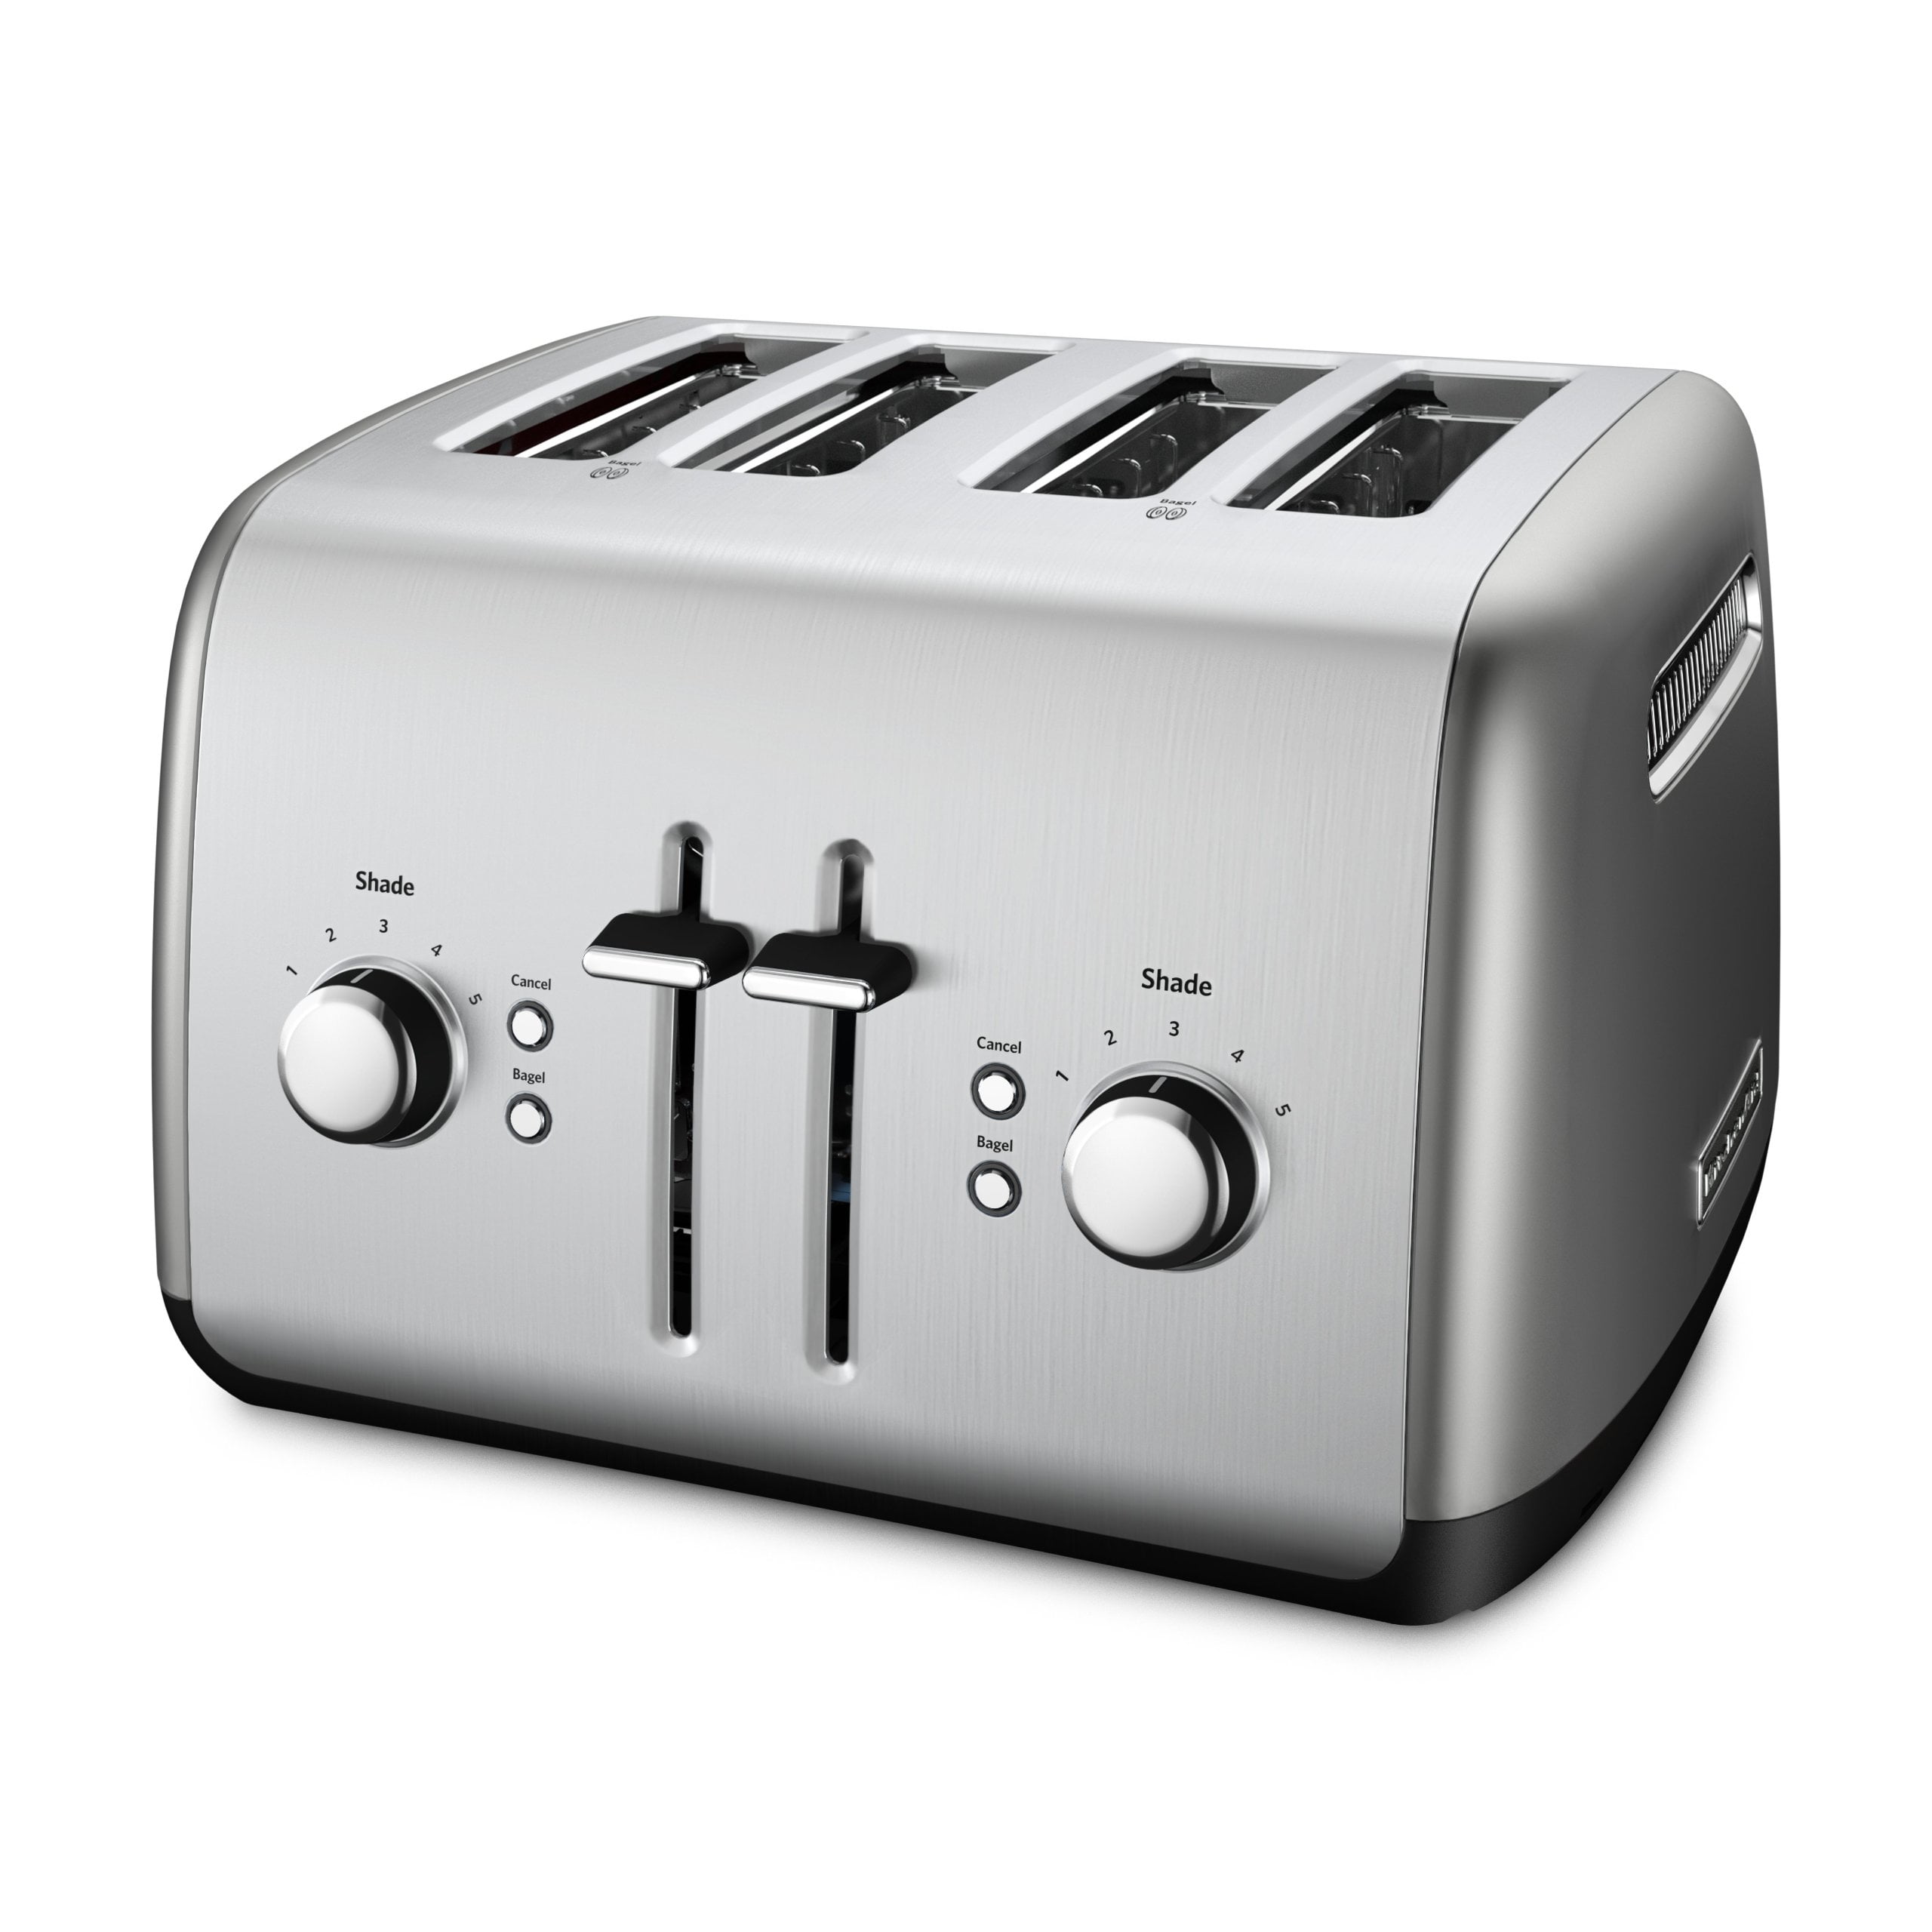 KitchenAid KMT4203FP Pro Line Series Frosted Pearl White 4-Slice Automatic  Toaster